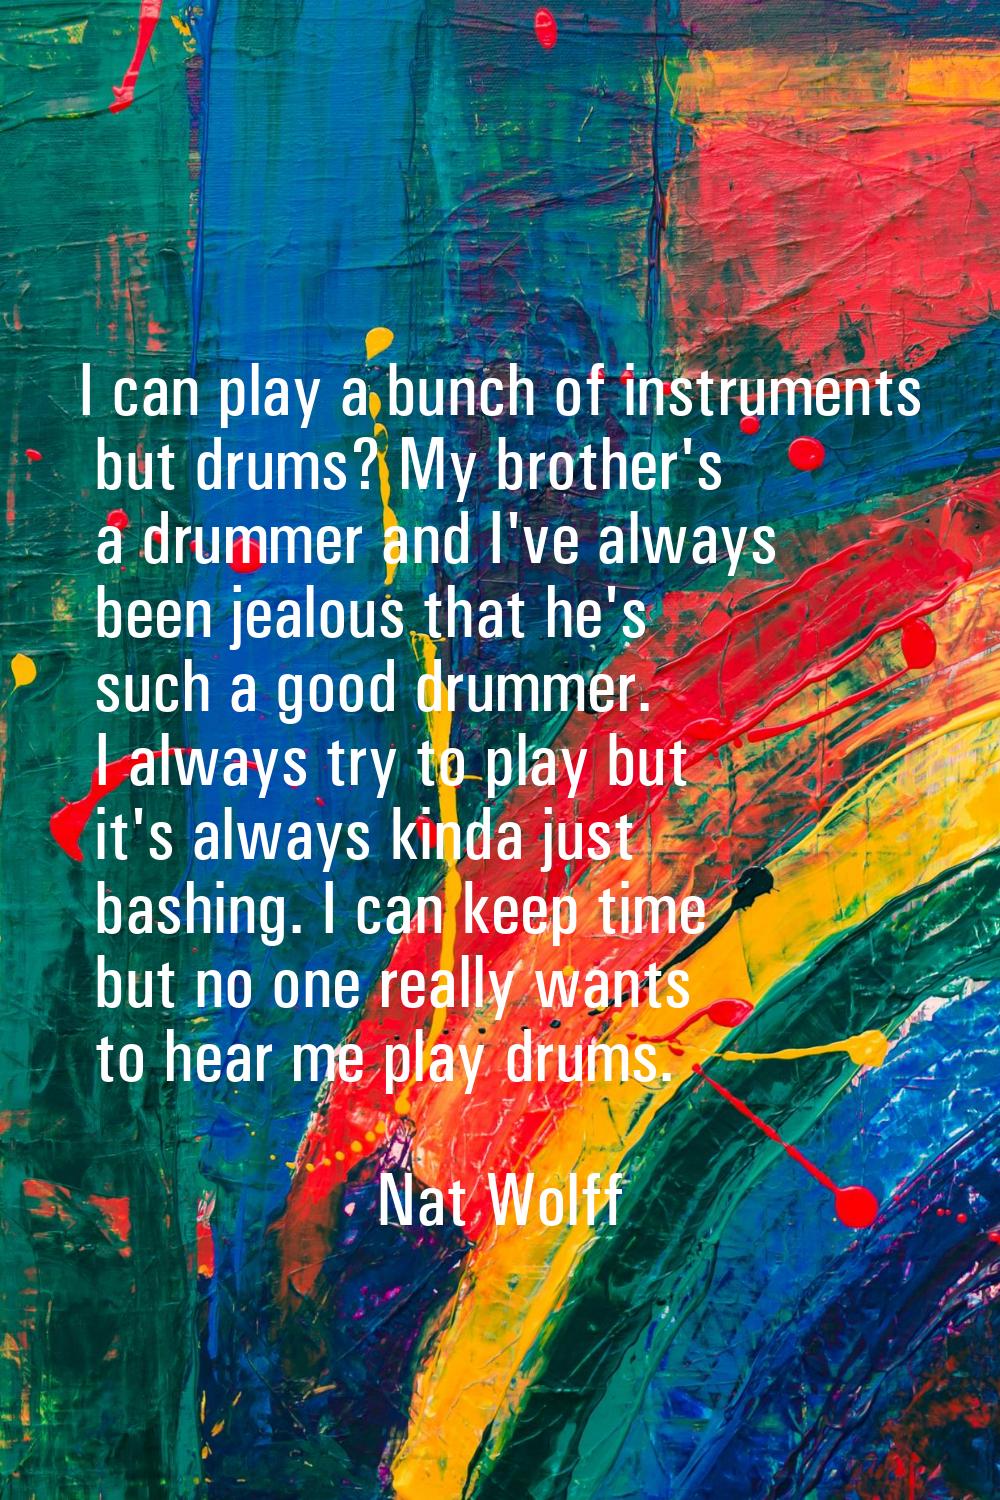 I can play a bunch of instruments but drums? My brother's a drummer and I've always been jealous th